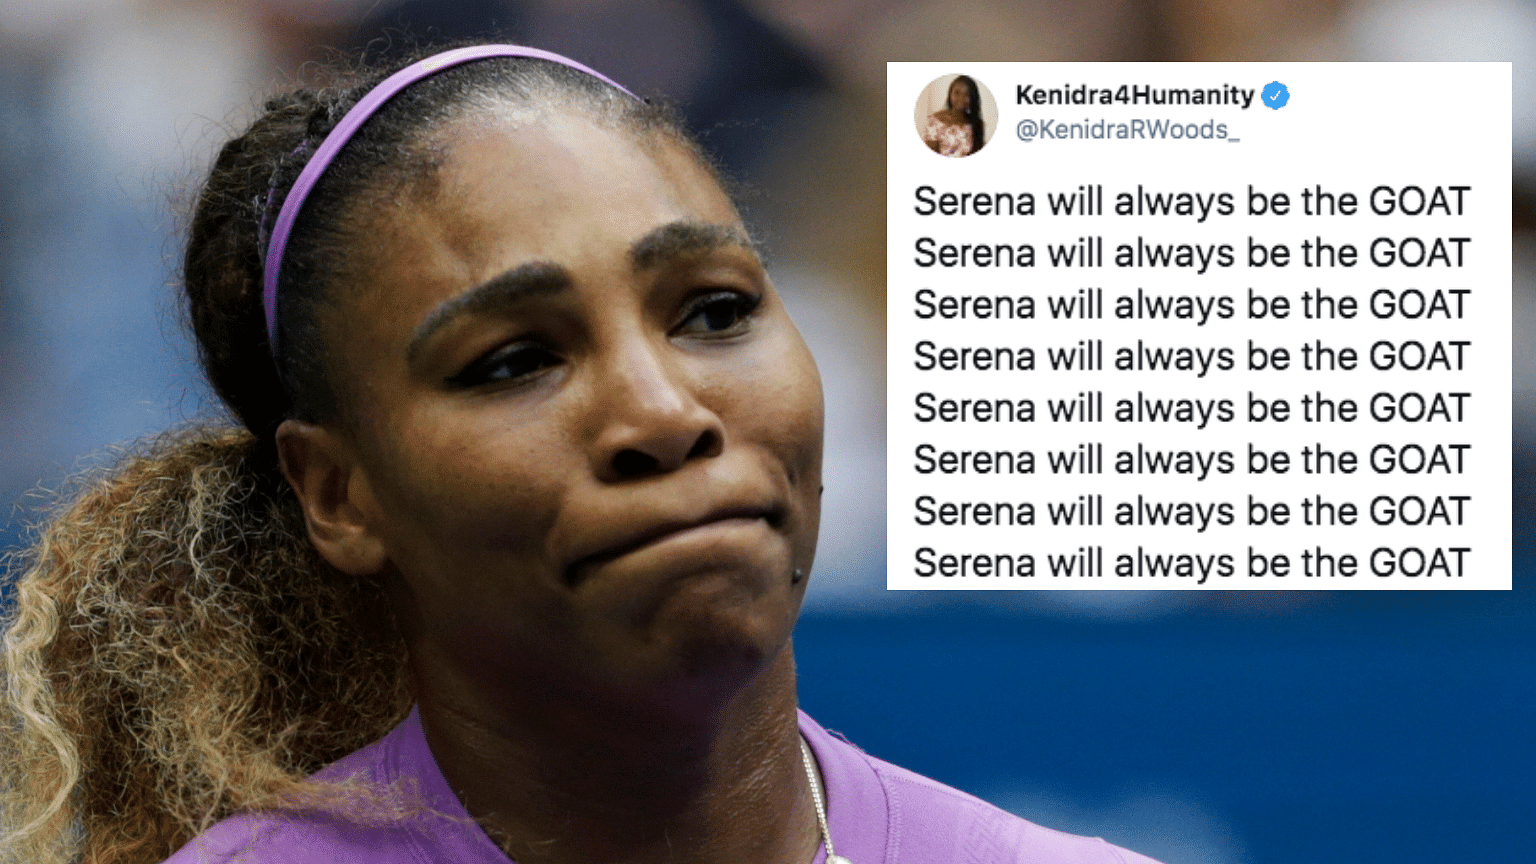 Serena Williams was denied a record-tying 24th Grand Slam title as she suffered a 6-3, 7-5 loss against 19-year-old Bianca Andreescu.